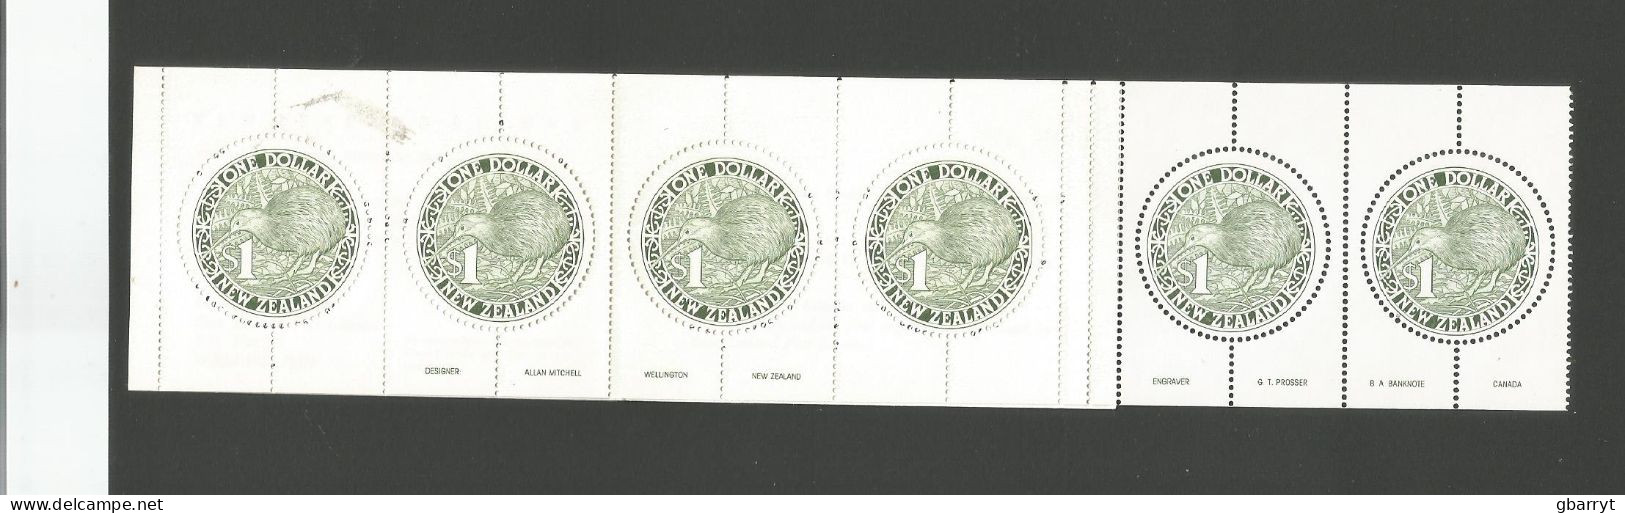 New Zealand > Booklets Scott # 918 Complete Booklet Kiwi.MNH VF.................w47 - Booklets